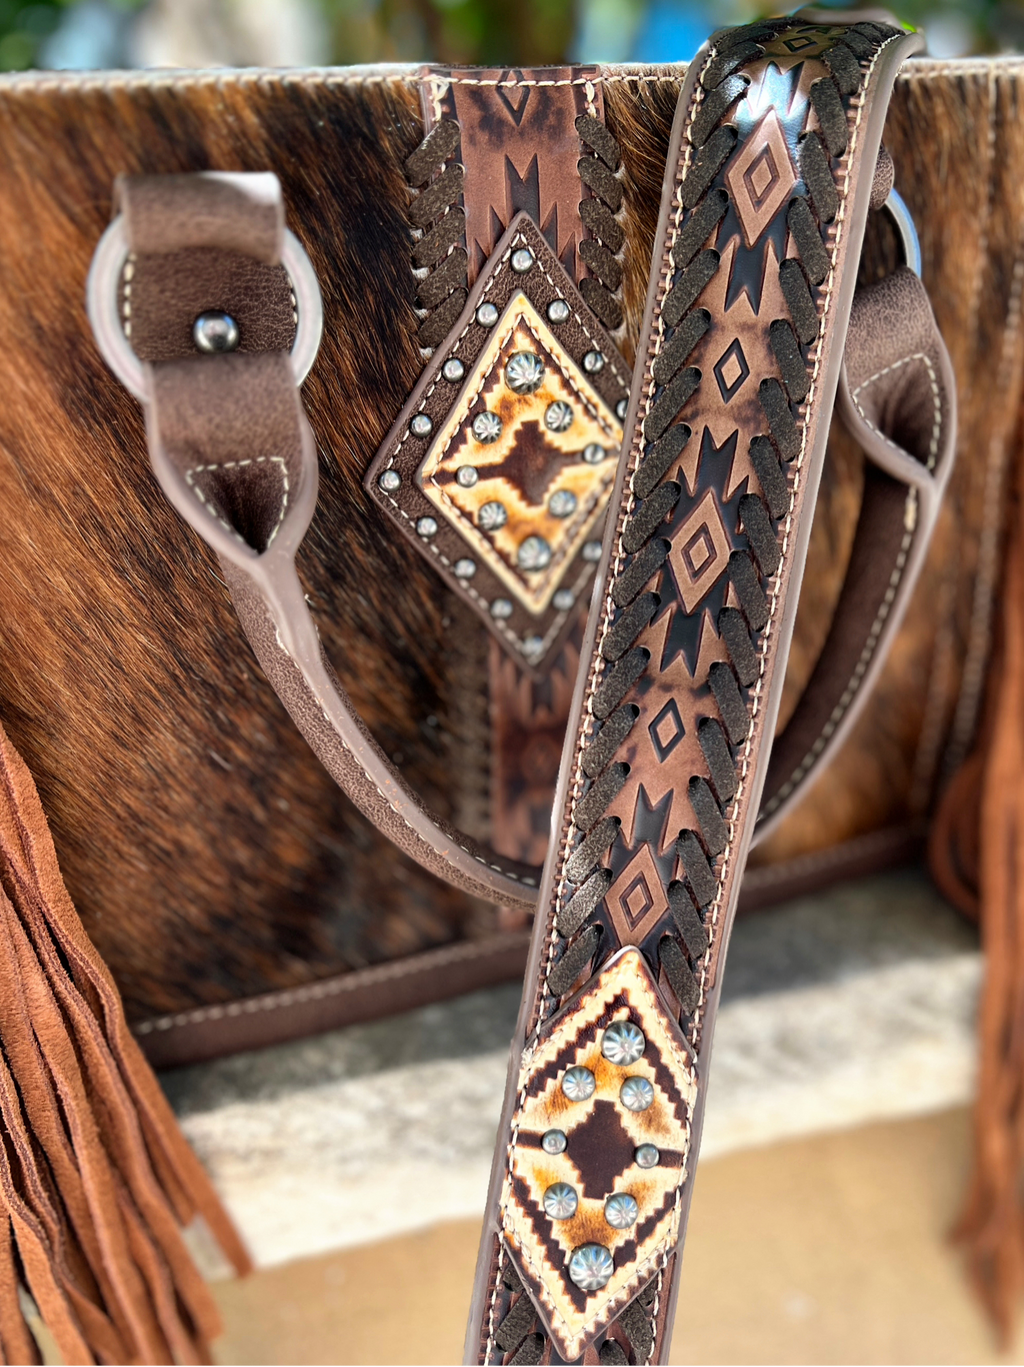 Wrangler Cuttin' Across A Pasture Cowhide Bag I Gussied Up Online. leather. hair on hide. brindle. brown leather. tooled leather. fringe detail. nail head accents. Small business. Women's western Boutique. Ships fast from Texas. 